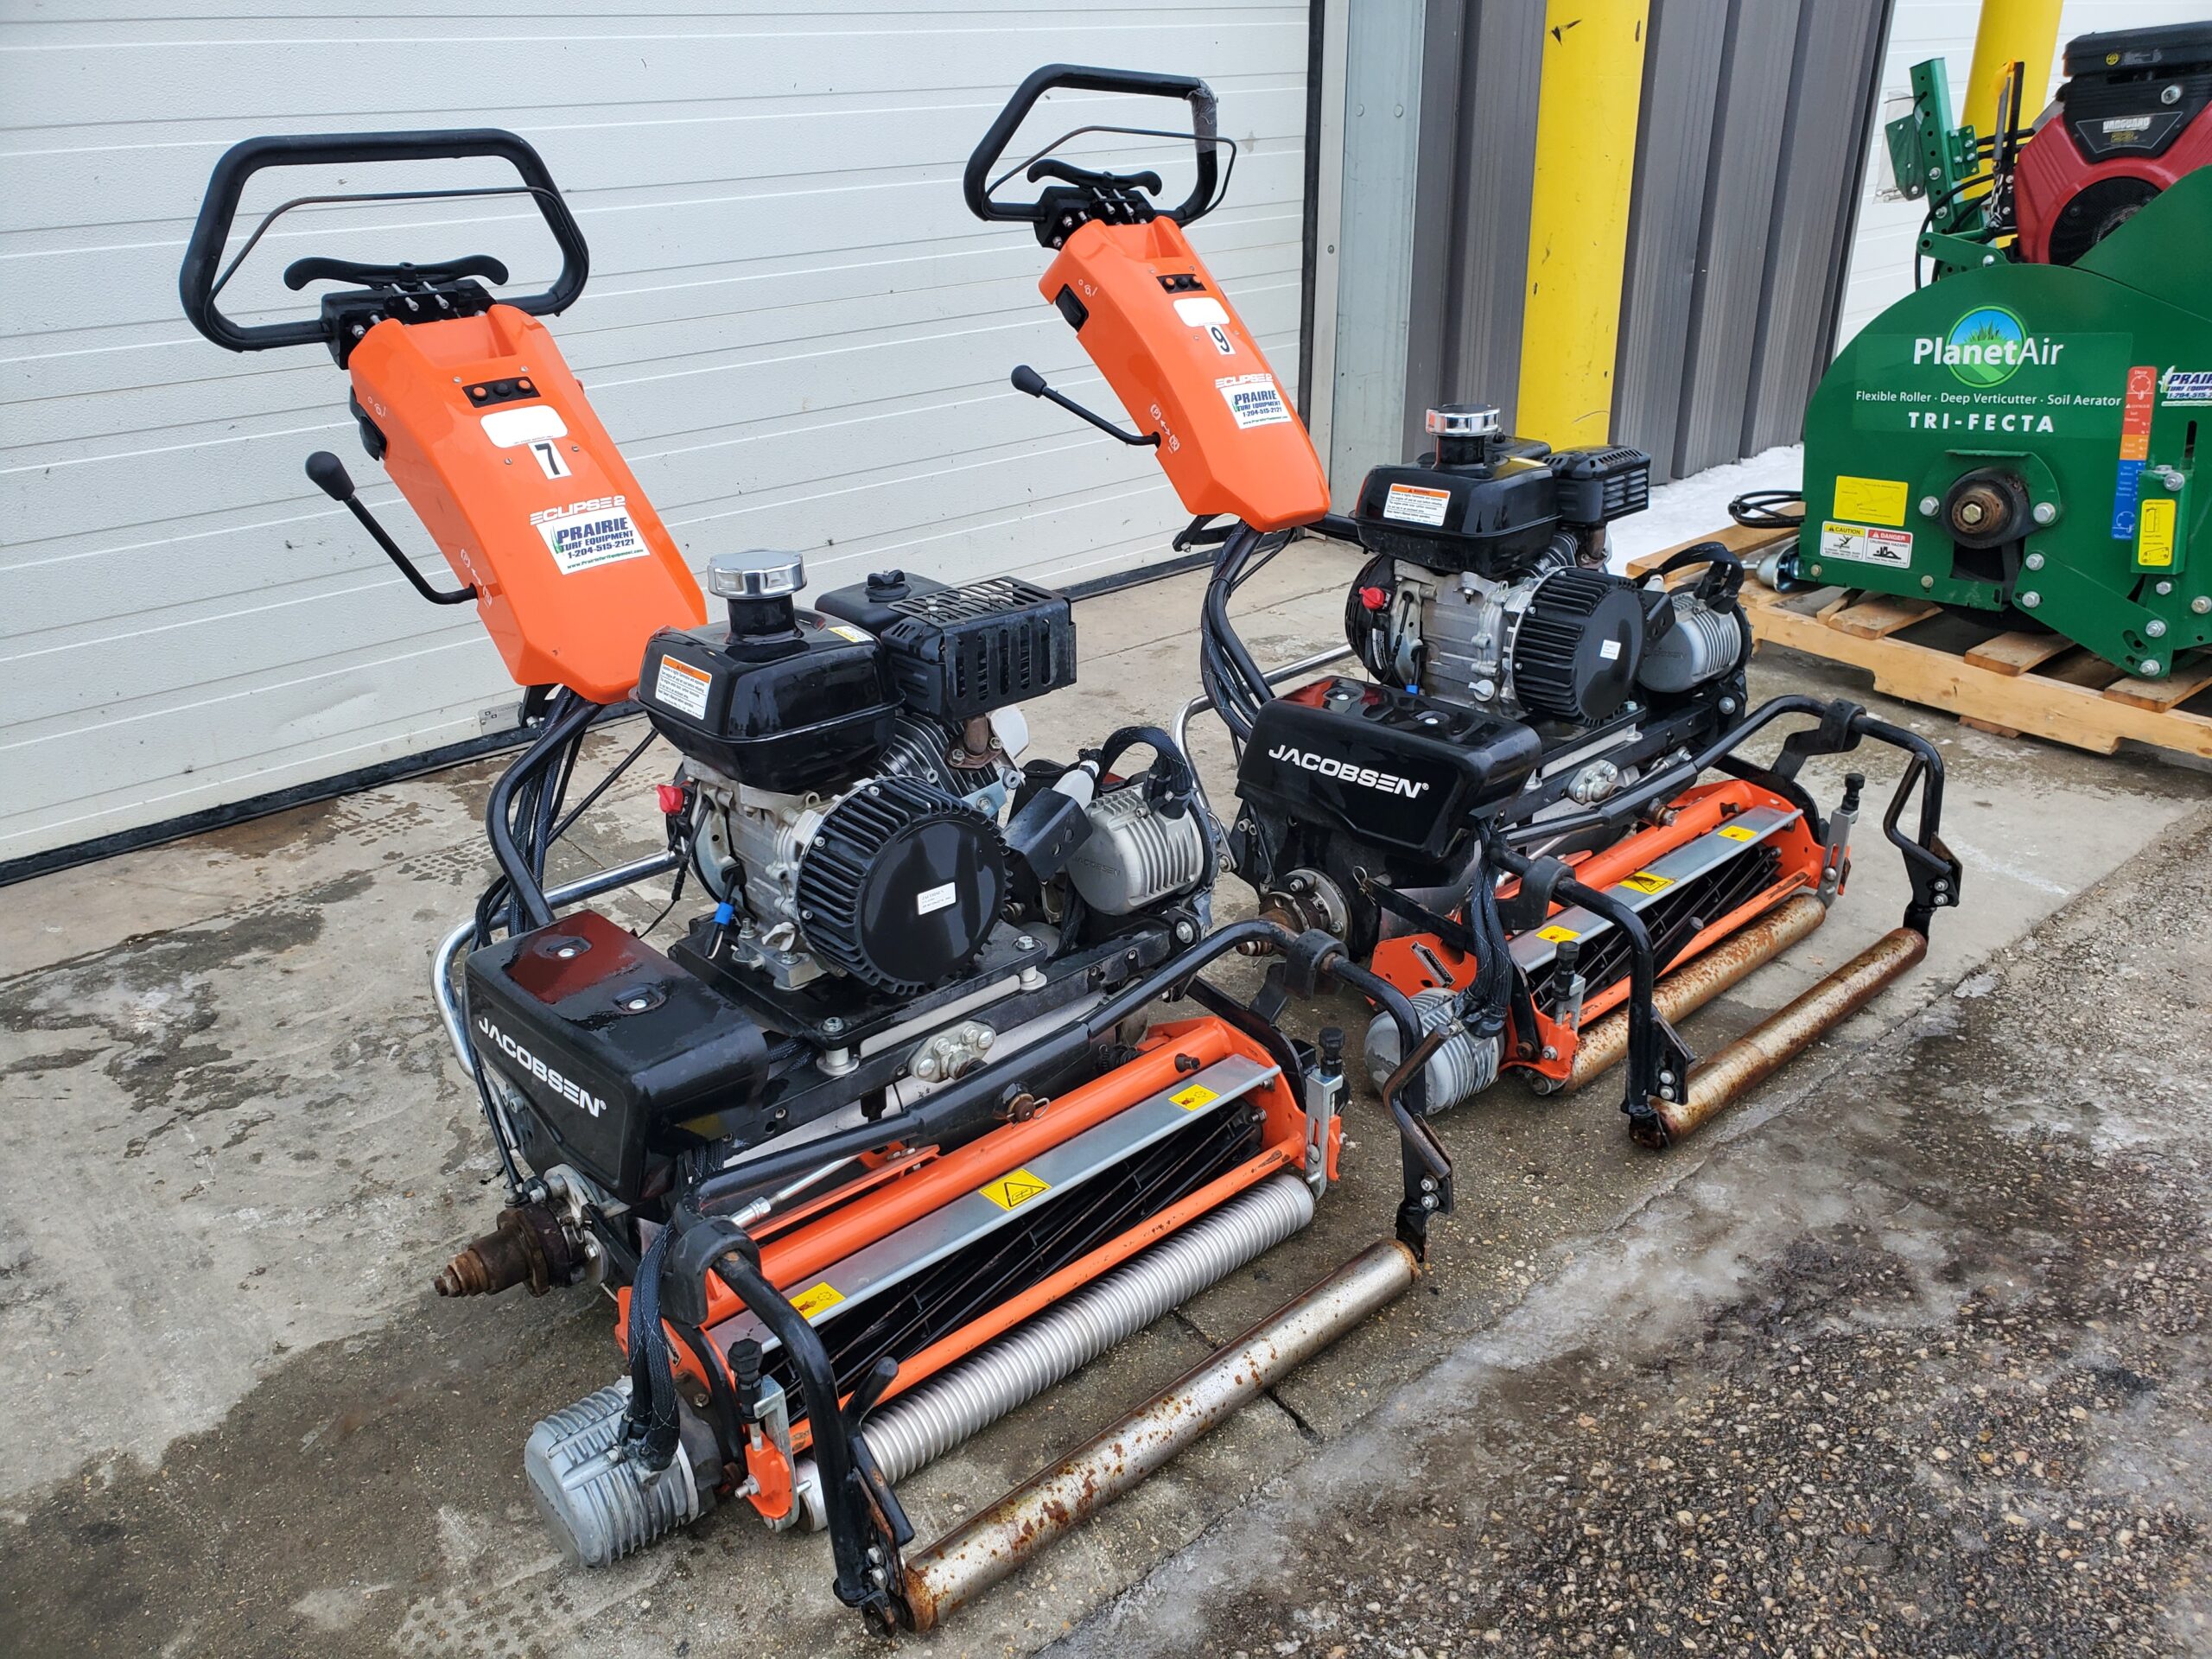 Jacobsen Eclipse 2 Walking Greens Mowers – Many Available In Stock